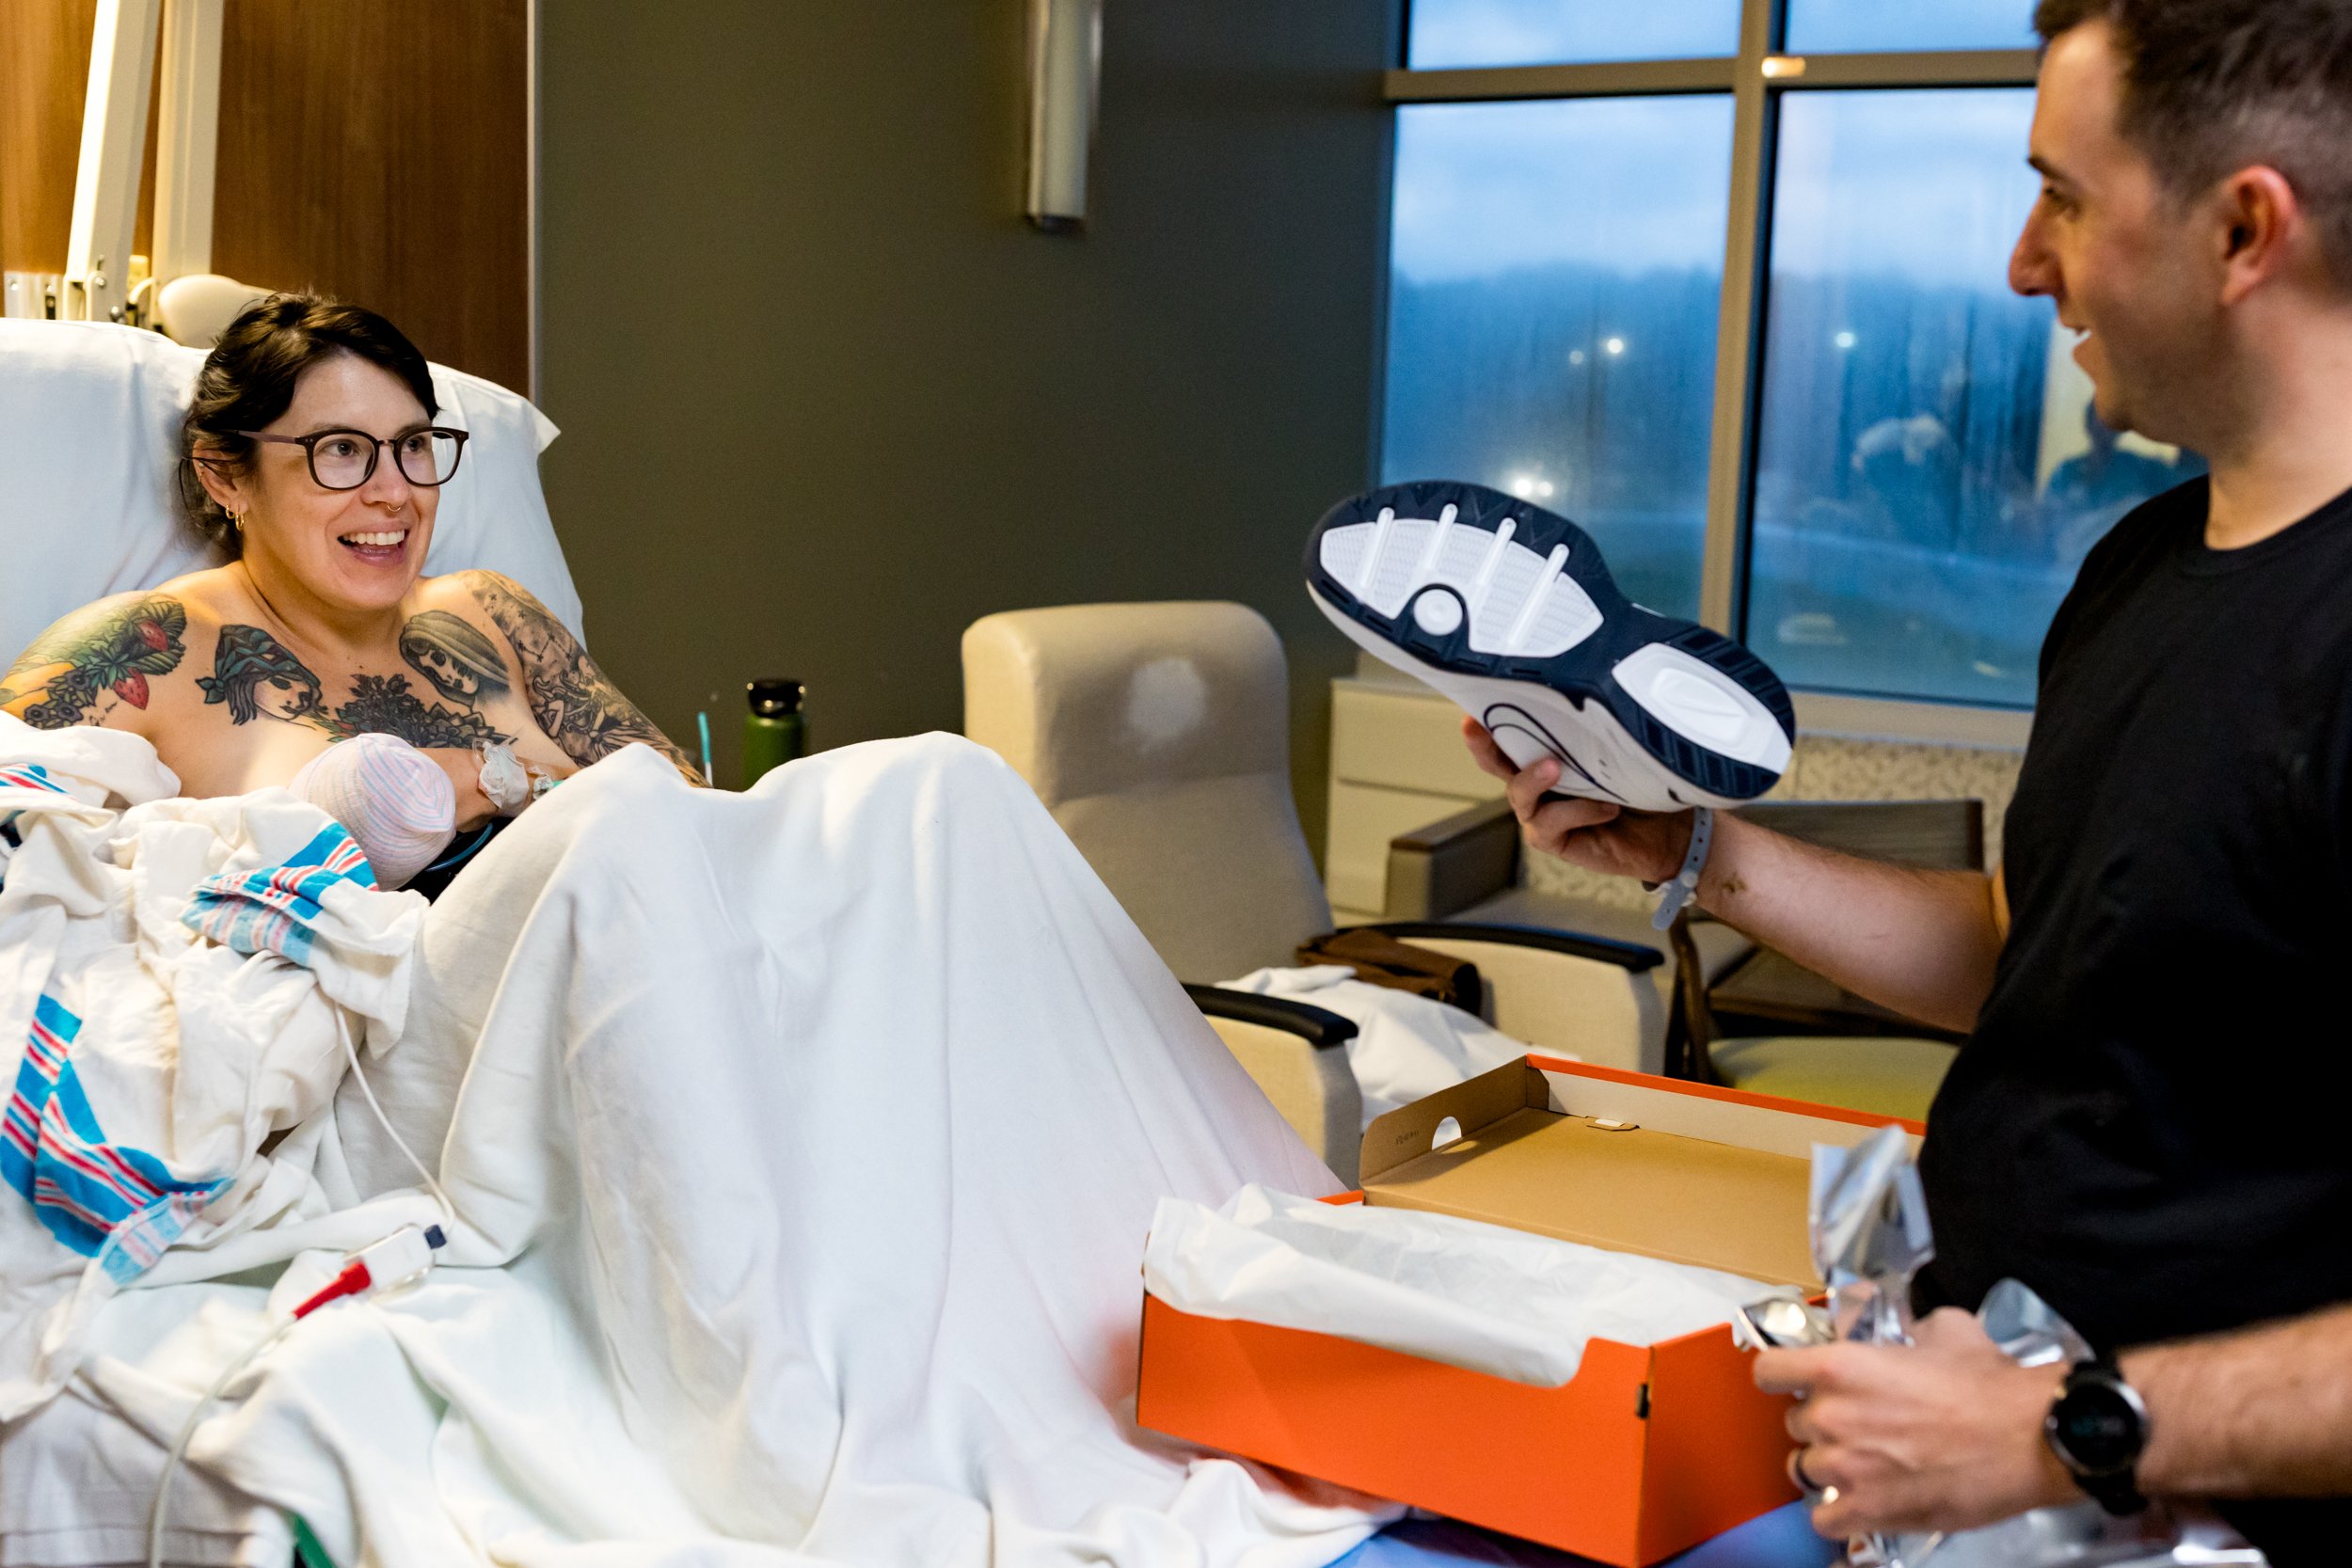 husband laughing after wife gets him "dad shoes" after the birth of their baby